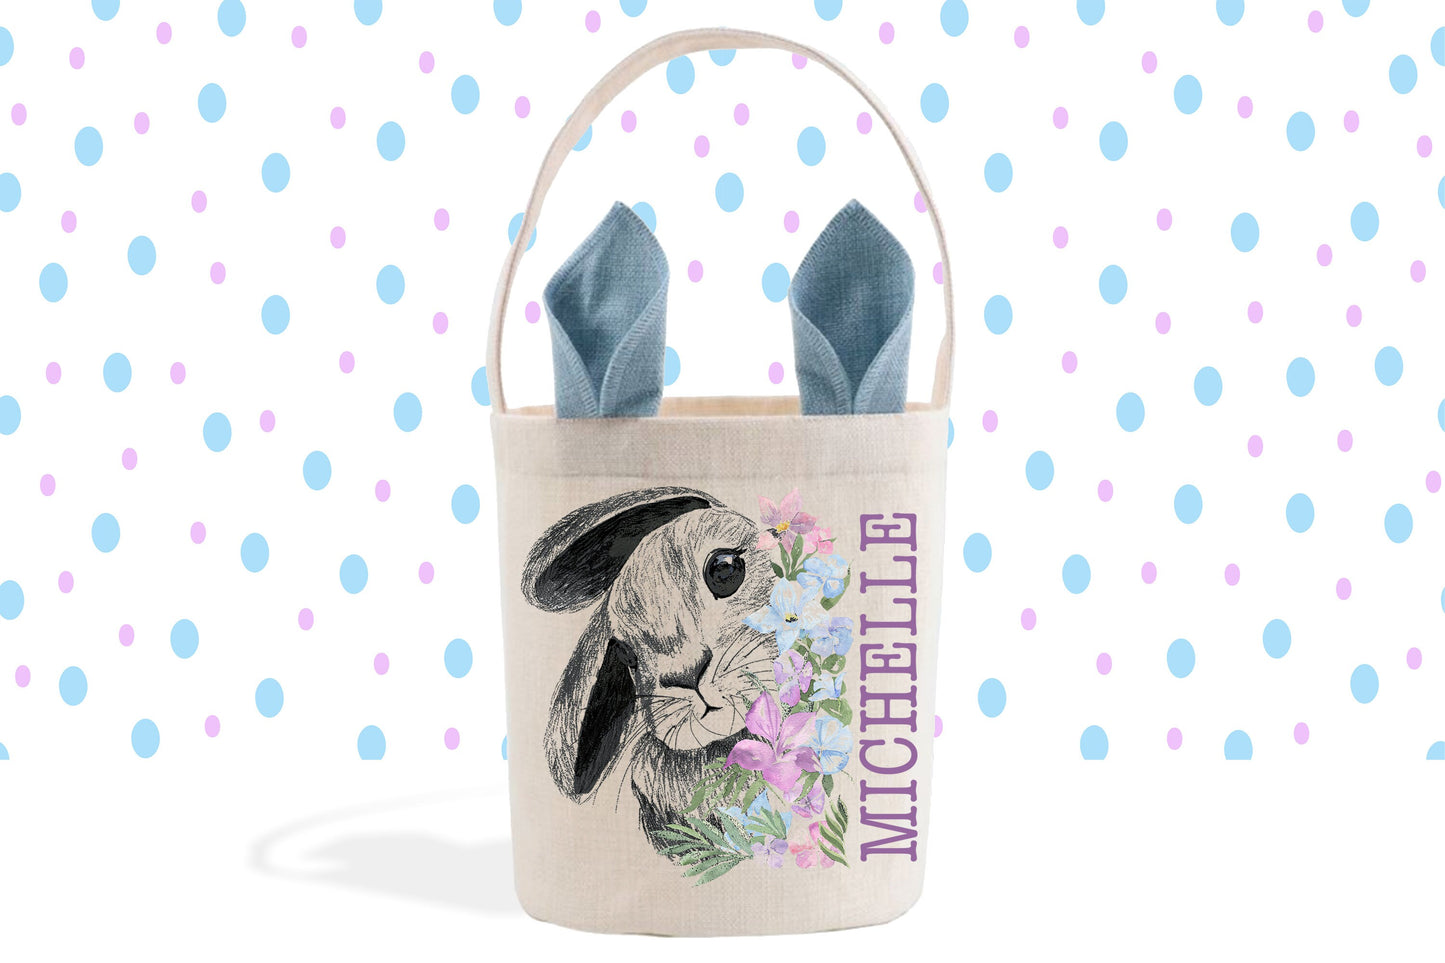 Curious Easter Bunny Flowers, Personalized Easter Basket, Custom Gift Basket, Easter Bunny Tote Bag, Girl's Linen Easter Bag, Bunny Rabbit